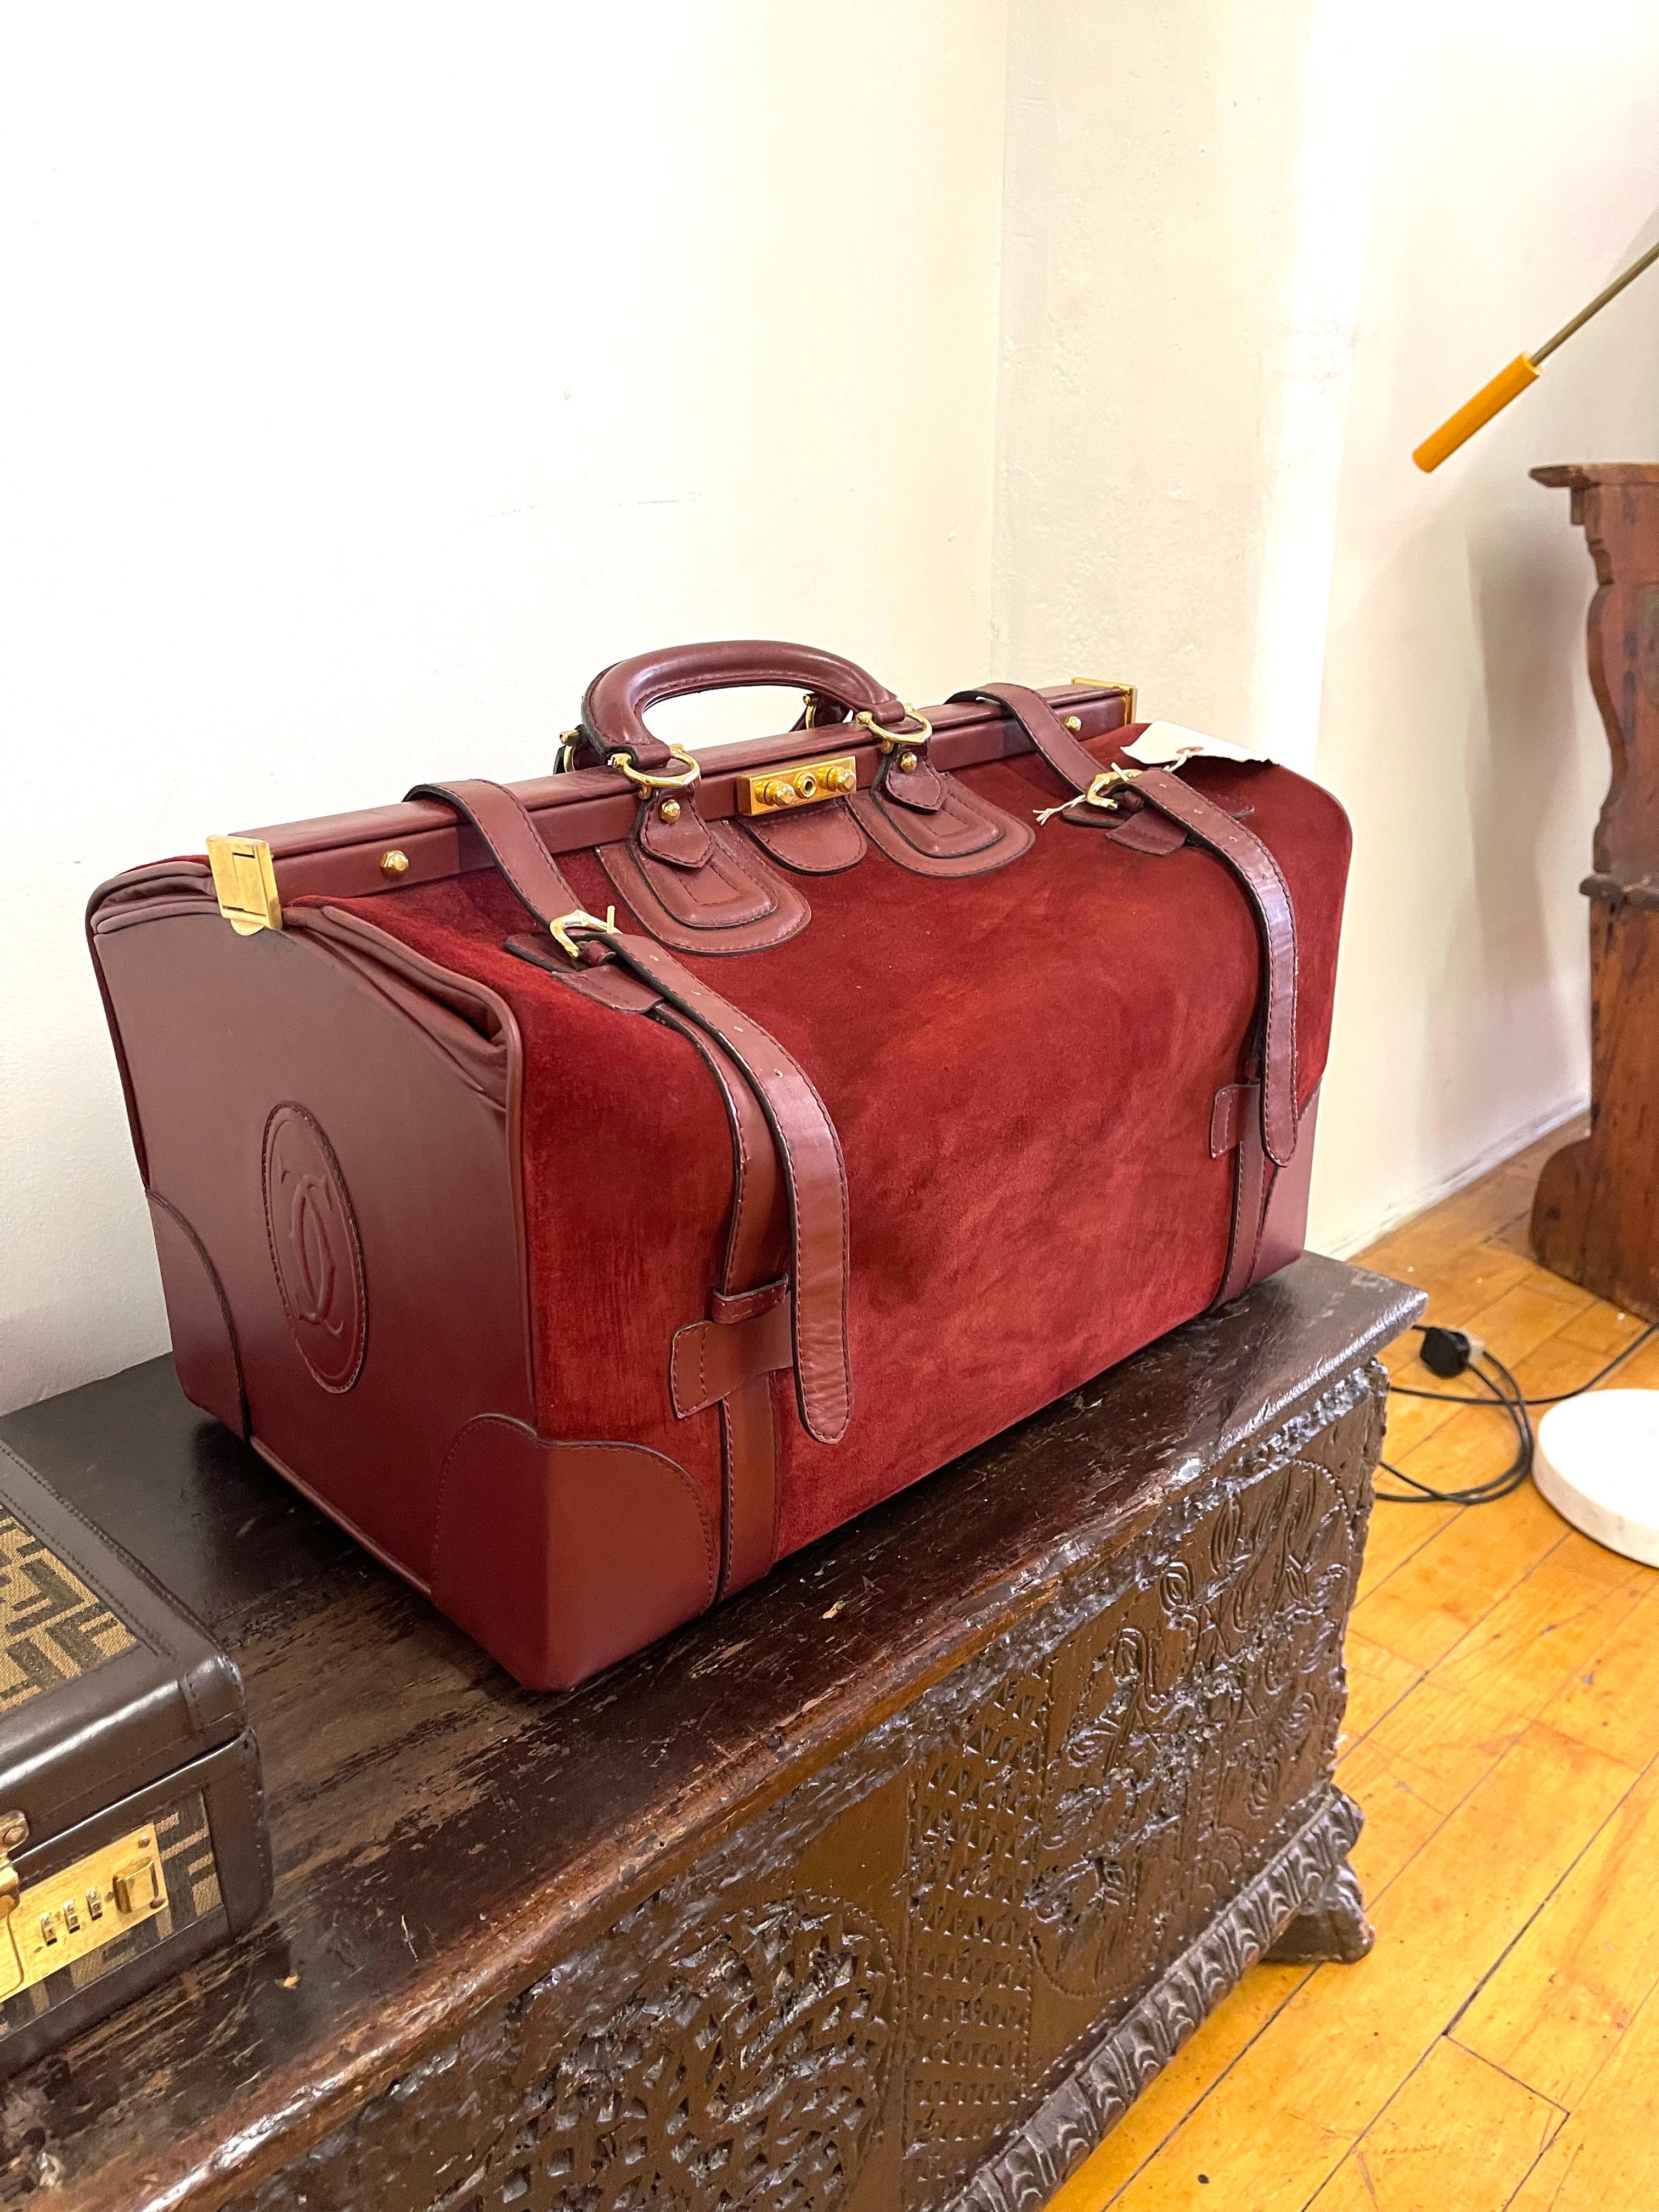 Discover the timeless elegance of the authentic Le Must de Cartier vintage Suede and leather luggage bag collection, a coveted treasure from 1984. This vintage Cartier bag belongs to a 1984 travel luggage Cartier collection that ceased production in